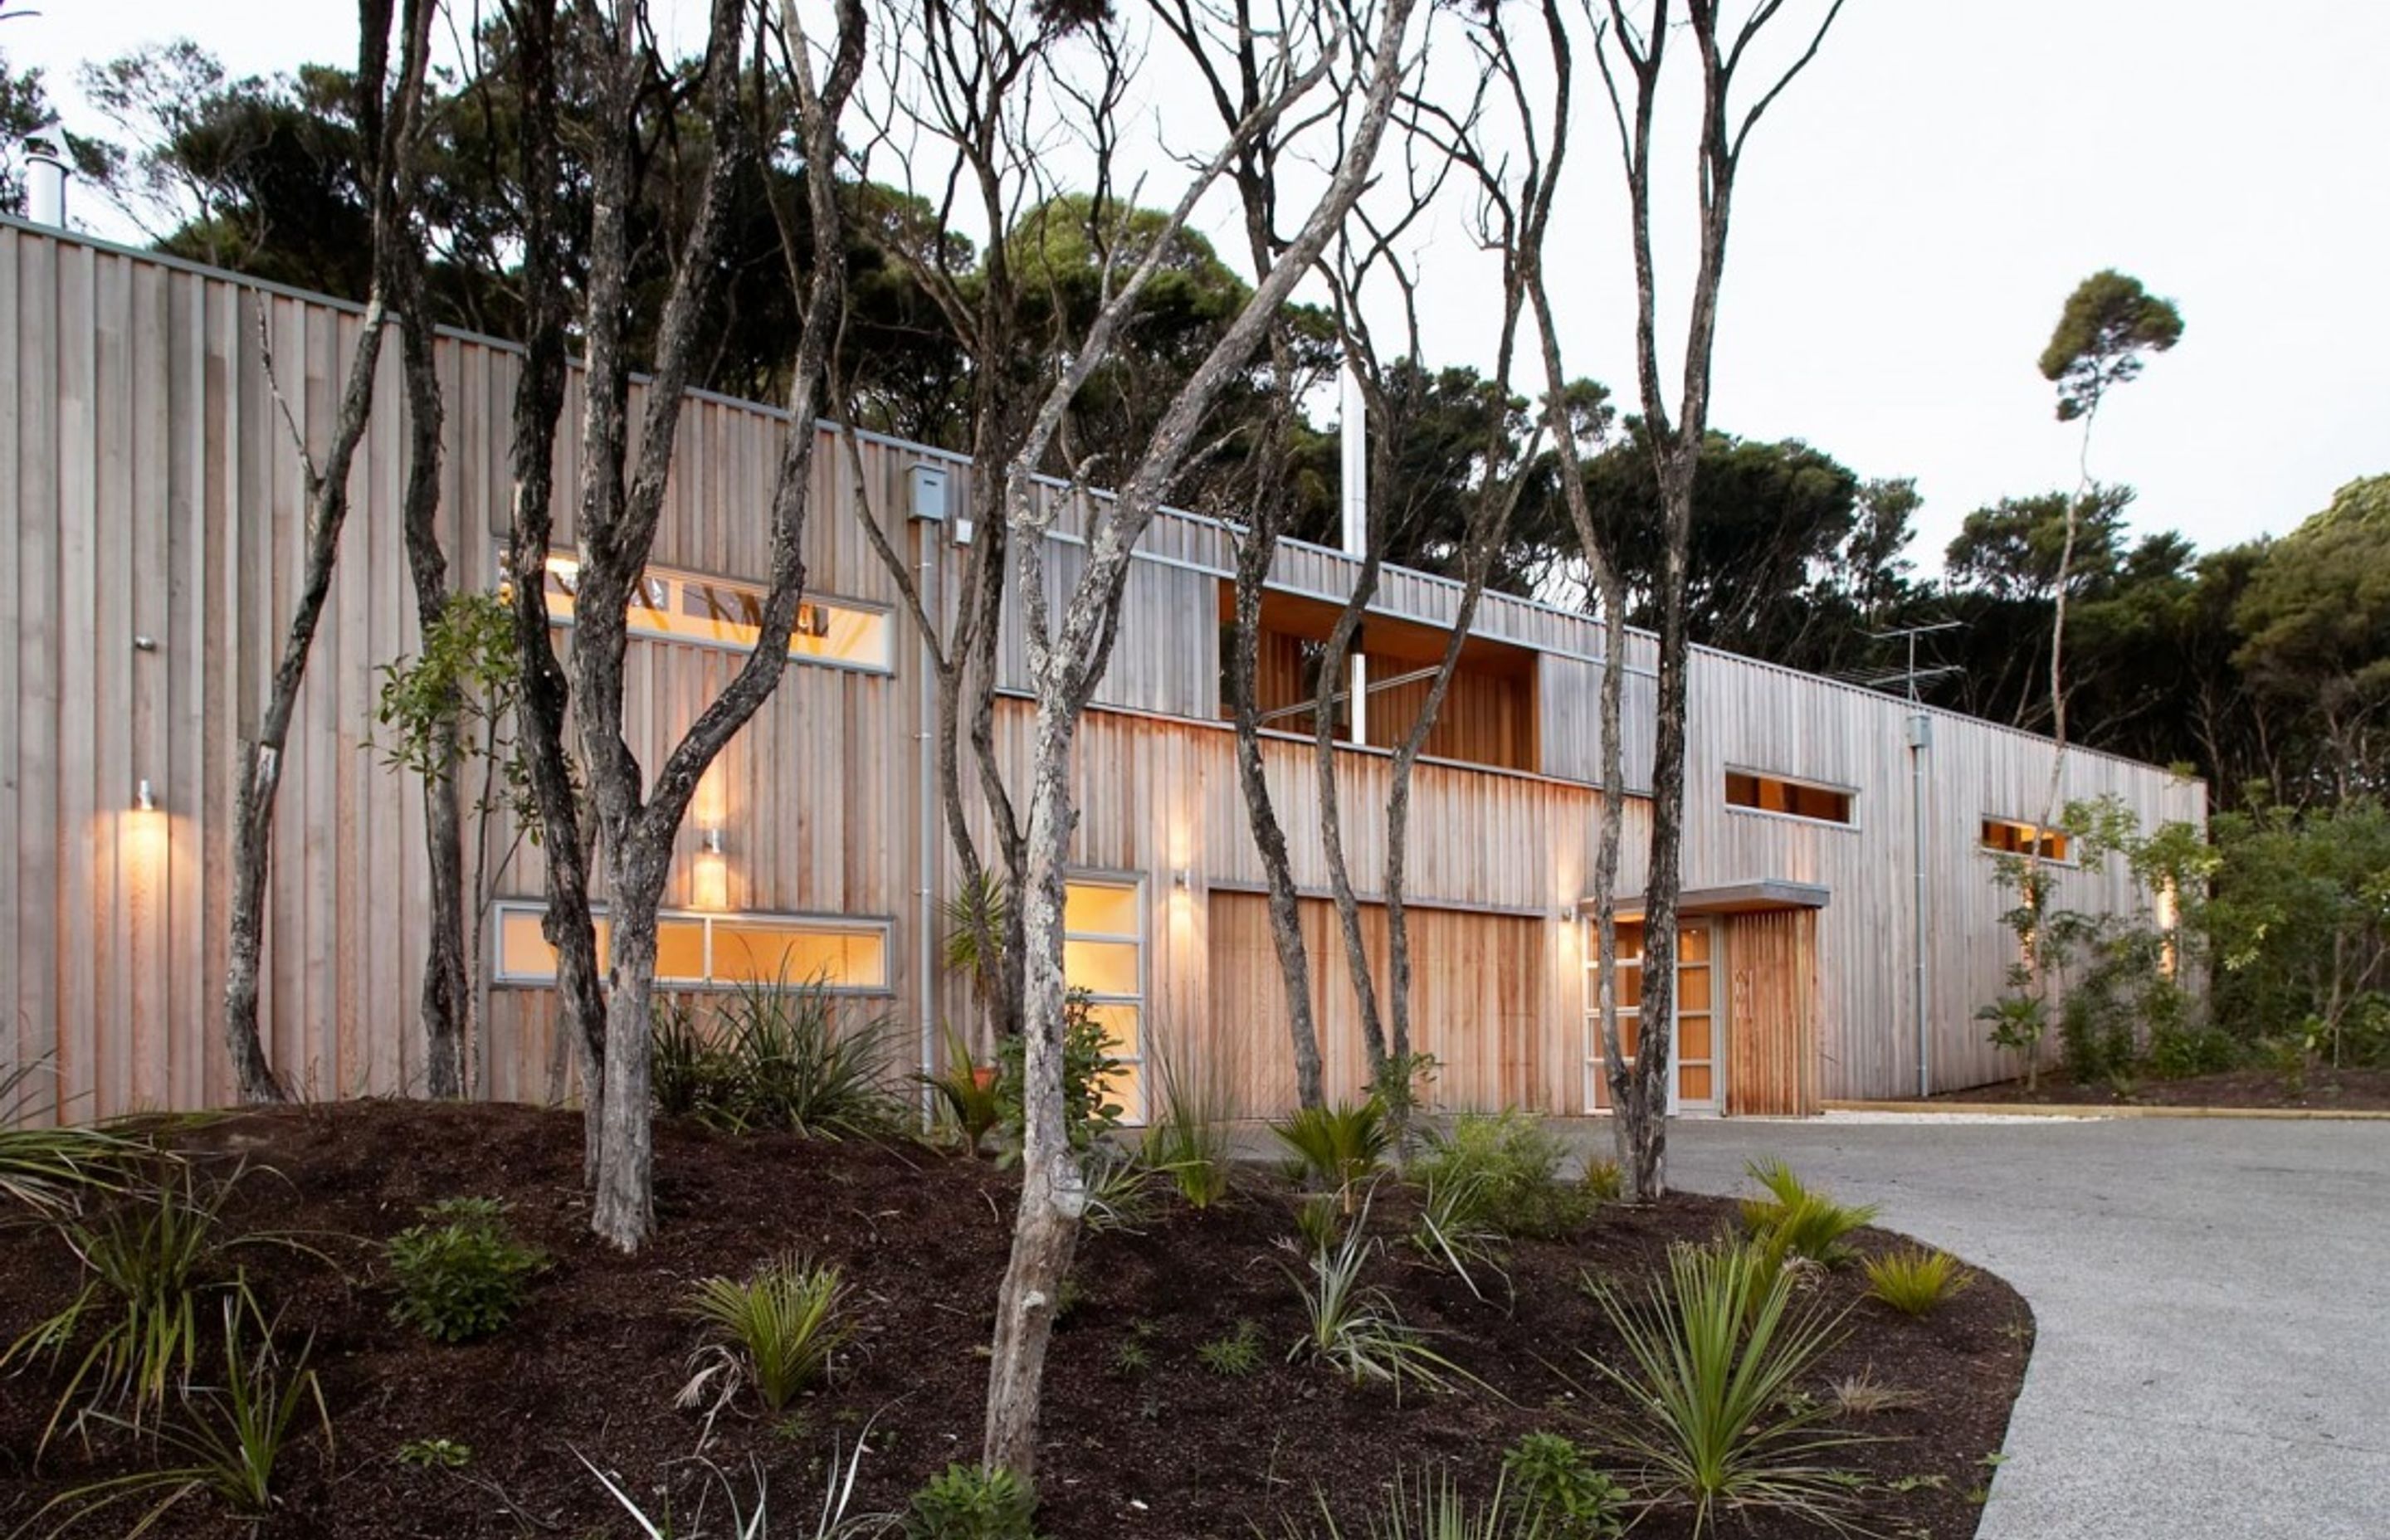 Point House is clad in vertical western red cedar, left to weather to respond to the surrounding Kanuka trees on the site.  By Strachan Group Architects. Photo by Patrick Reynolds.